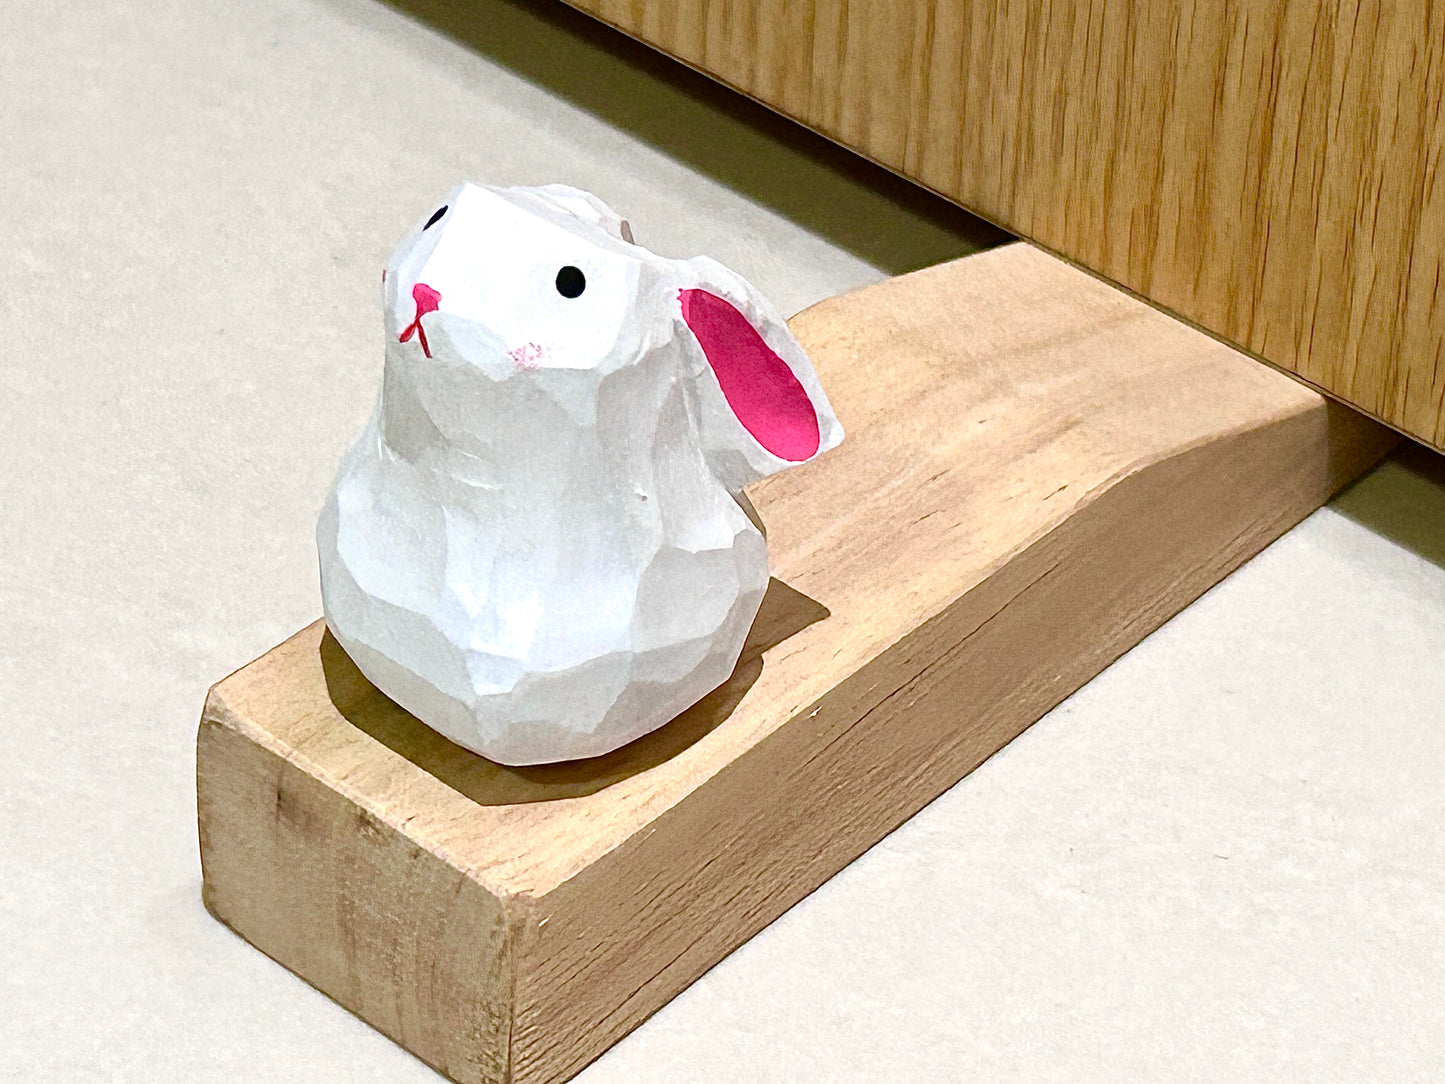 Whimsical Haven: Doorstop with Woodcarve Bunny Ornament